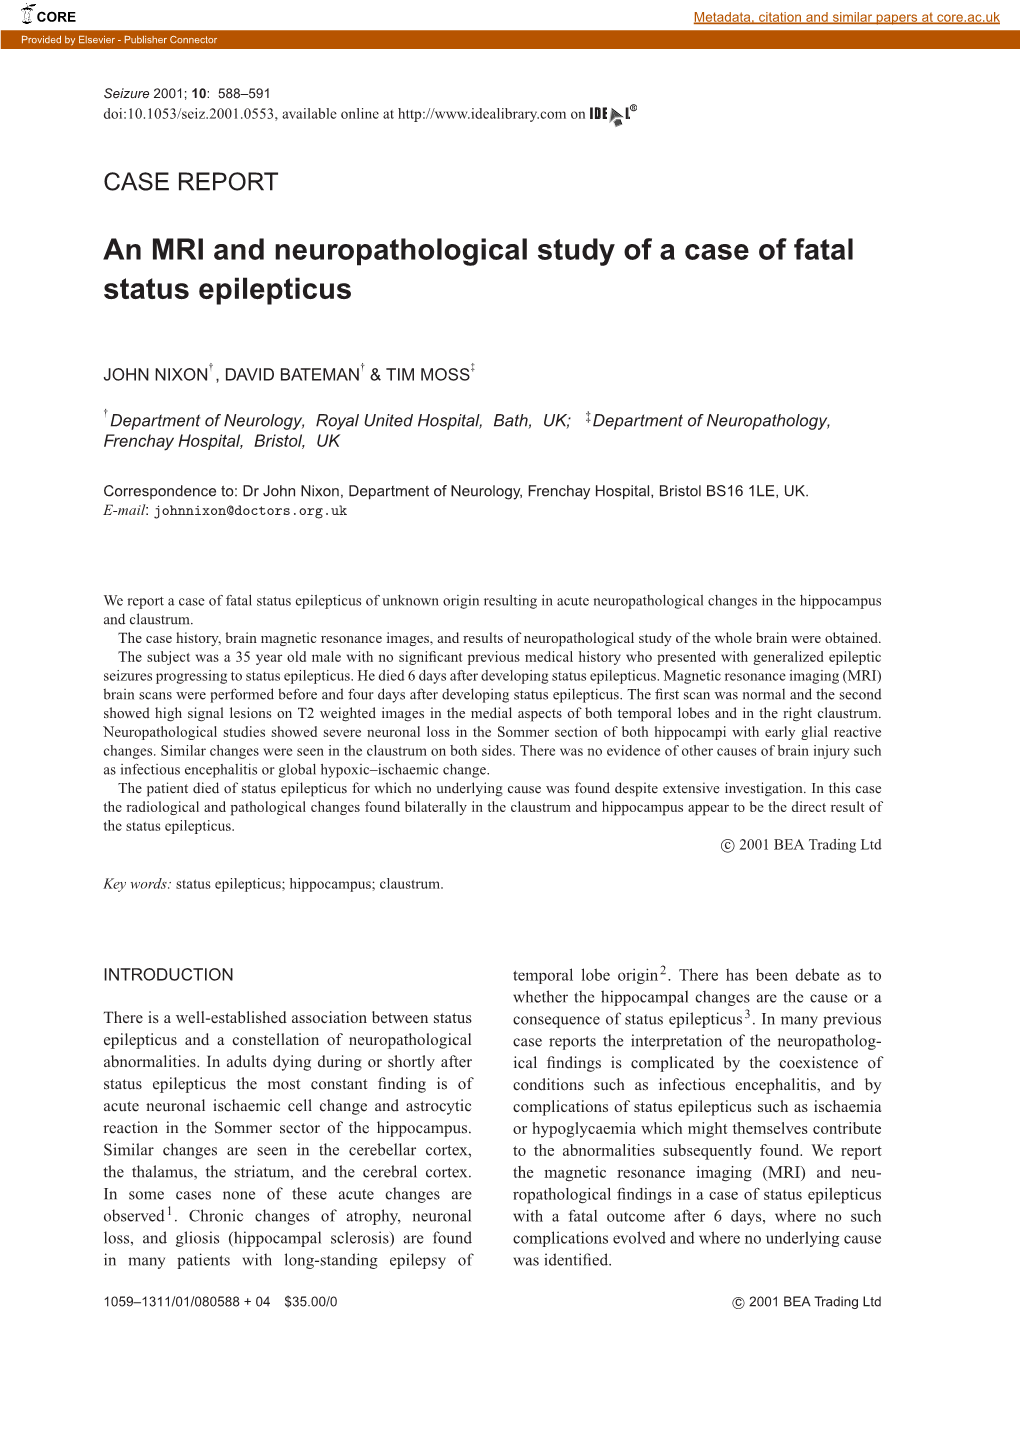 An MRI and Neuropathological Study of a Case of Fatal Status Epilepticus